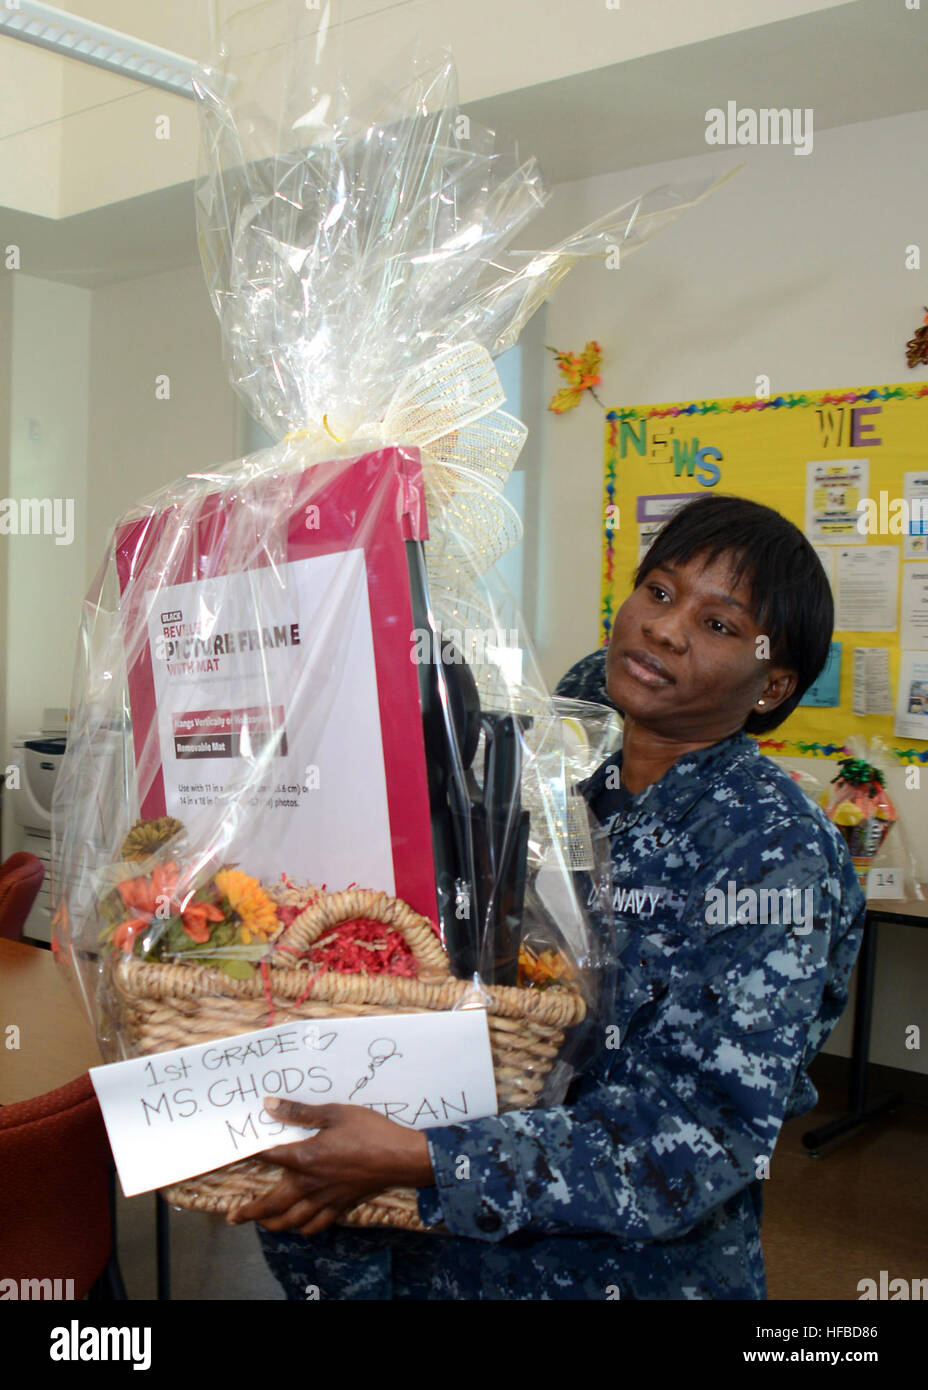 131030-N-BB534-270 SAN DIEGO (Oct. 30, 2013) Ship’s Serviceman Seaman Abidemi Omolewu carries a silent auction basket from the teacher’s lounge to the fall festival at Vista Del Mar Elementary School. Sailors assigned to amphibious transport dock ship USS Green Bay (LPD 20) volunteered to run the games at the school’s fall festival. Green Bay is conducting a regularly scheduled dry dock period at General Dynamics National Steel and Shipbuilding Company (NASSCO). (U.S. Navy photo by Mass Communication Specialist 1st Class Elizabeth Merriam/Released) Fall festival at Vista Del Mar Elementary Sch Stock Photo